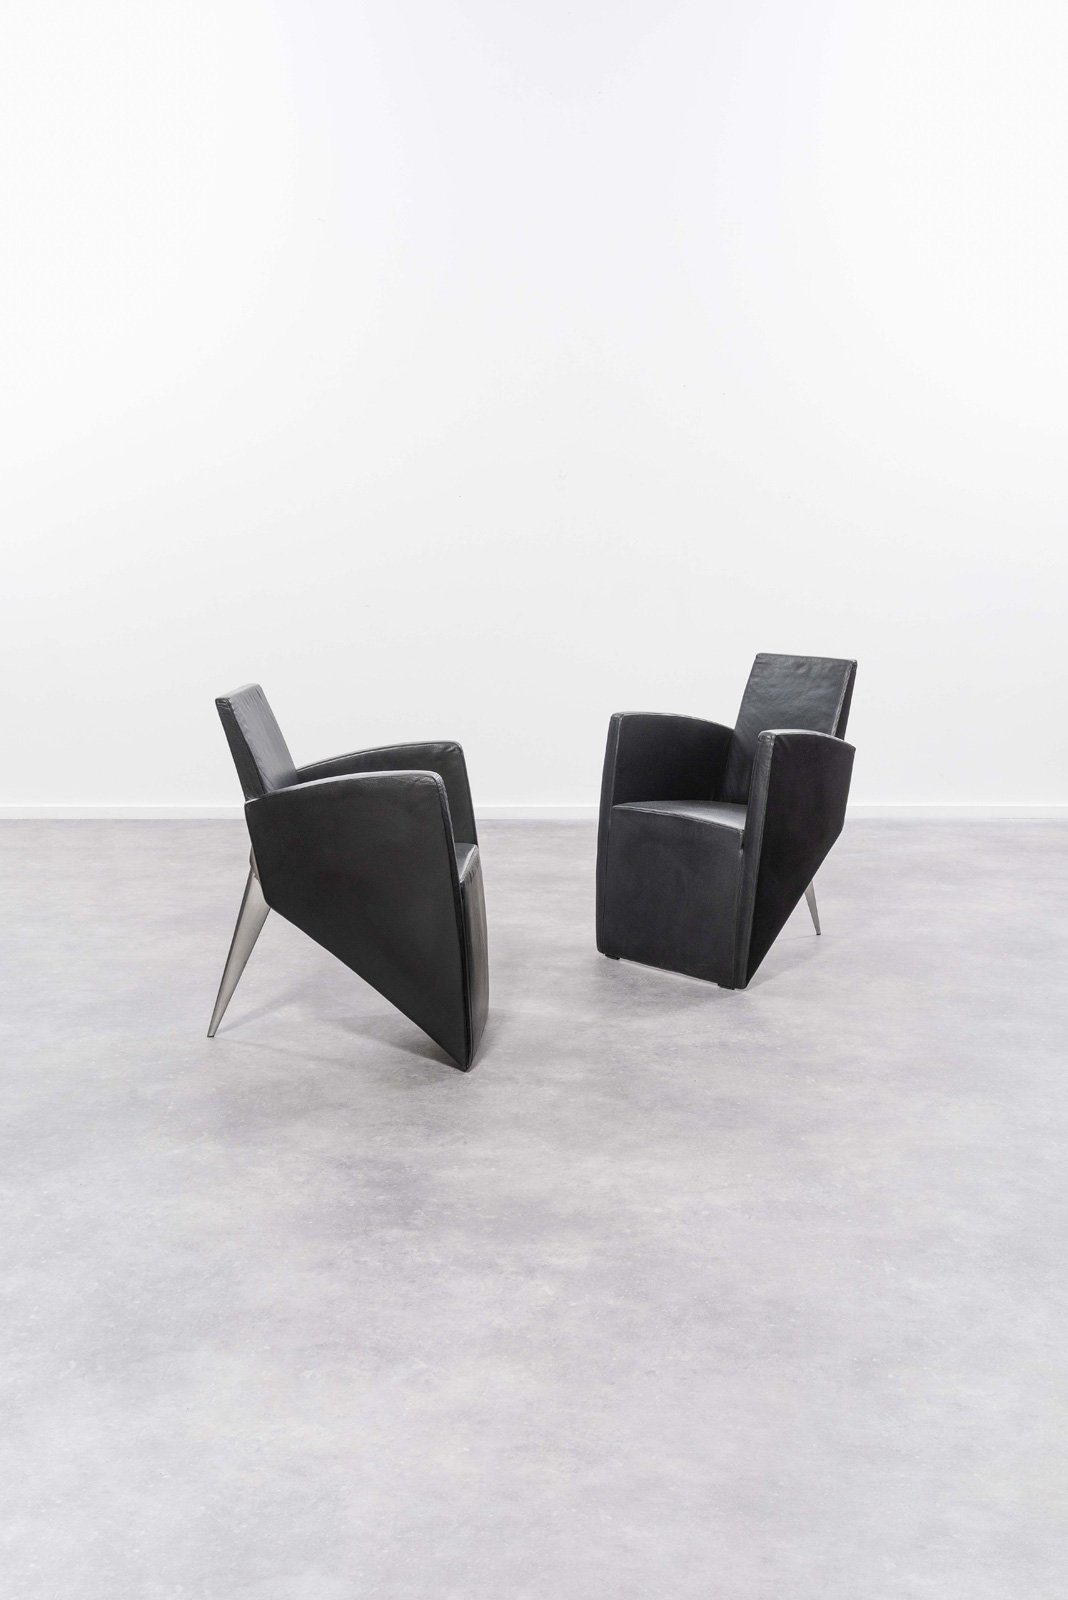 Lang by Philippe Starck, 1987